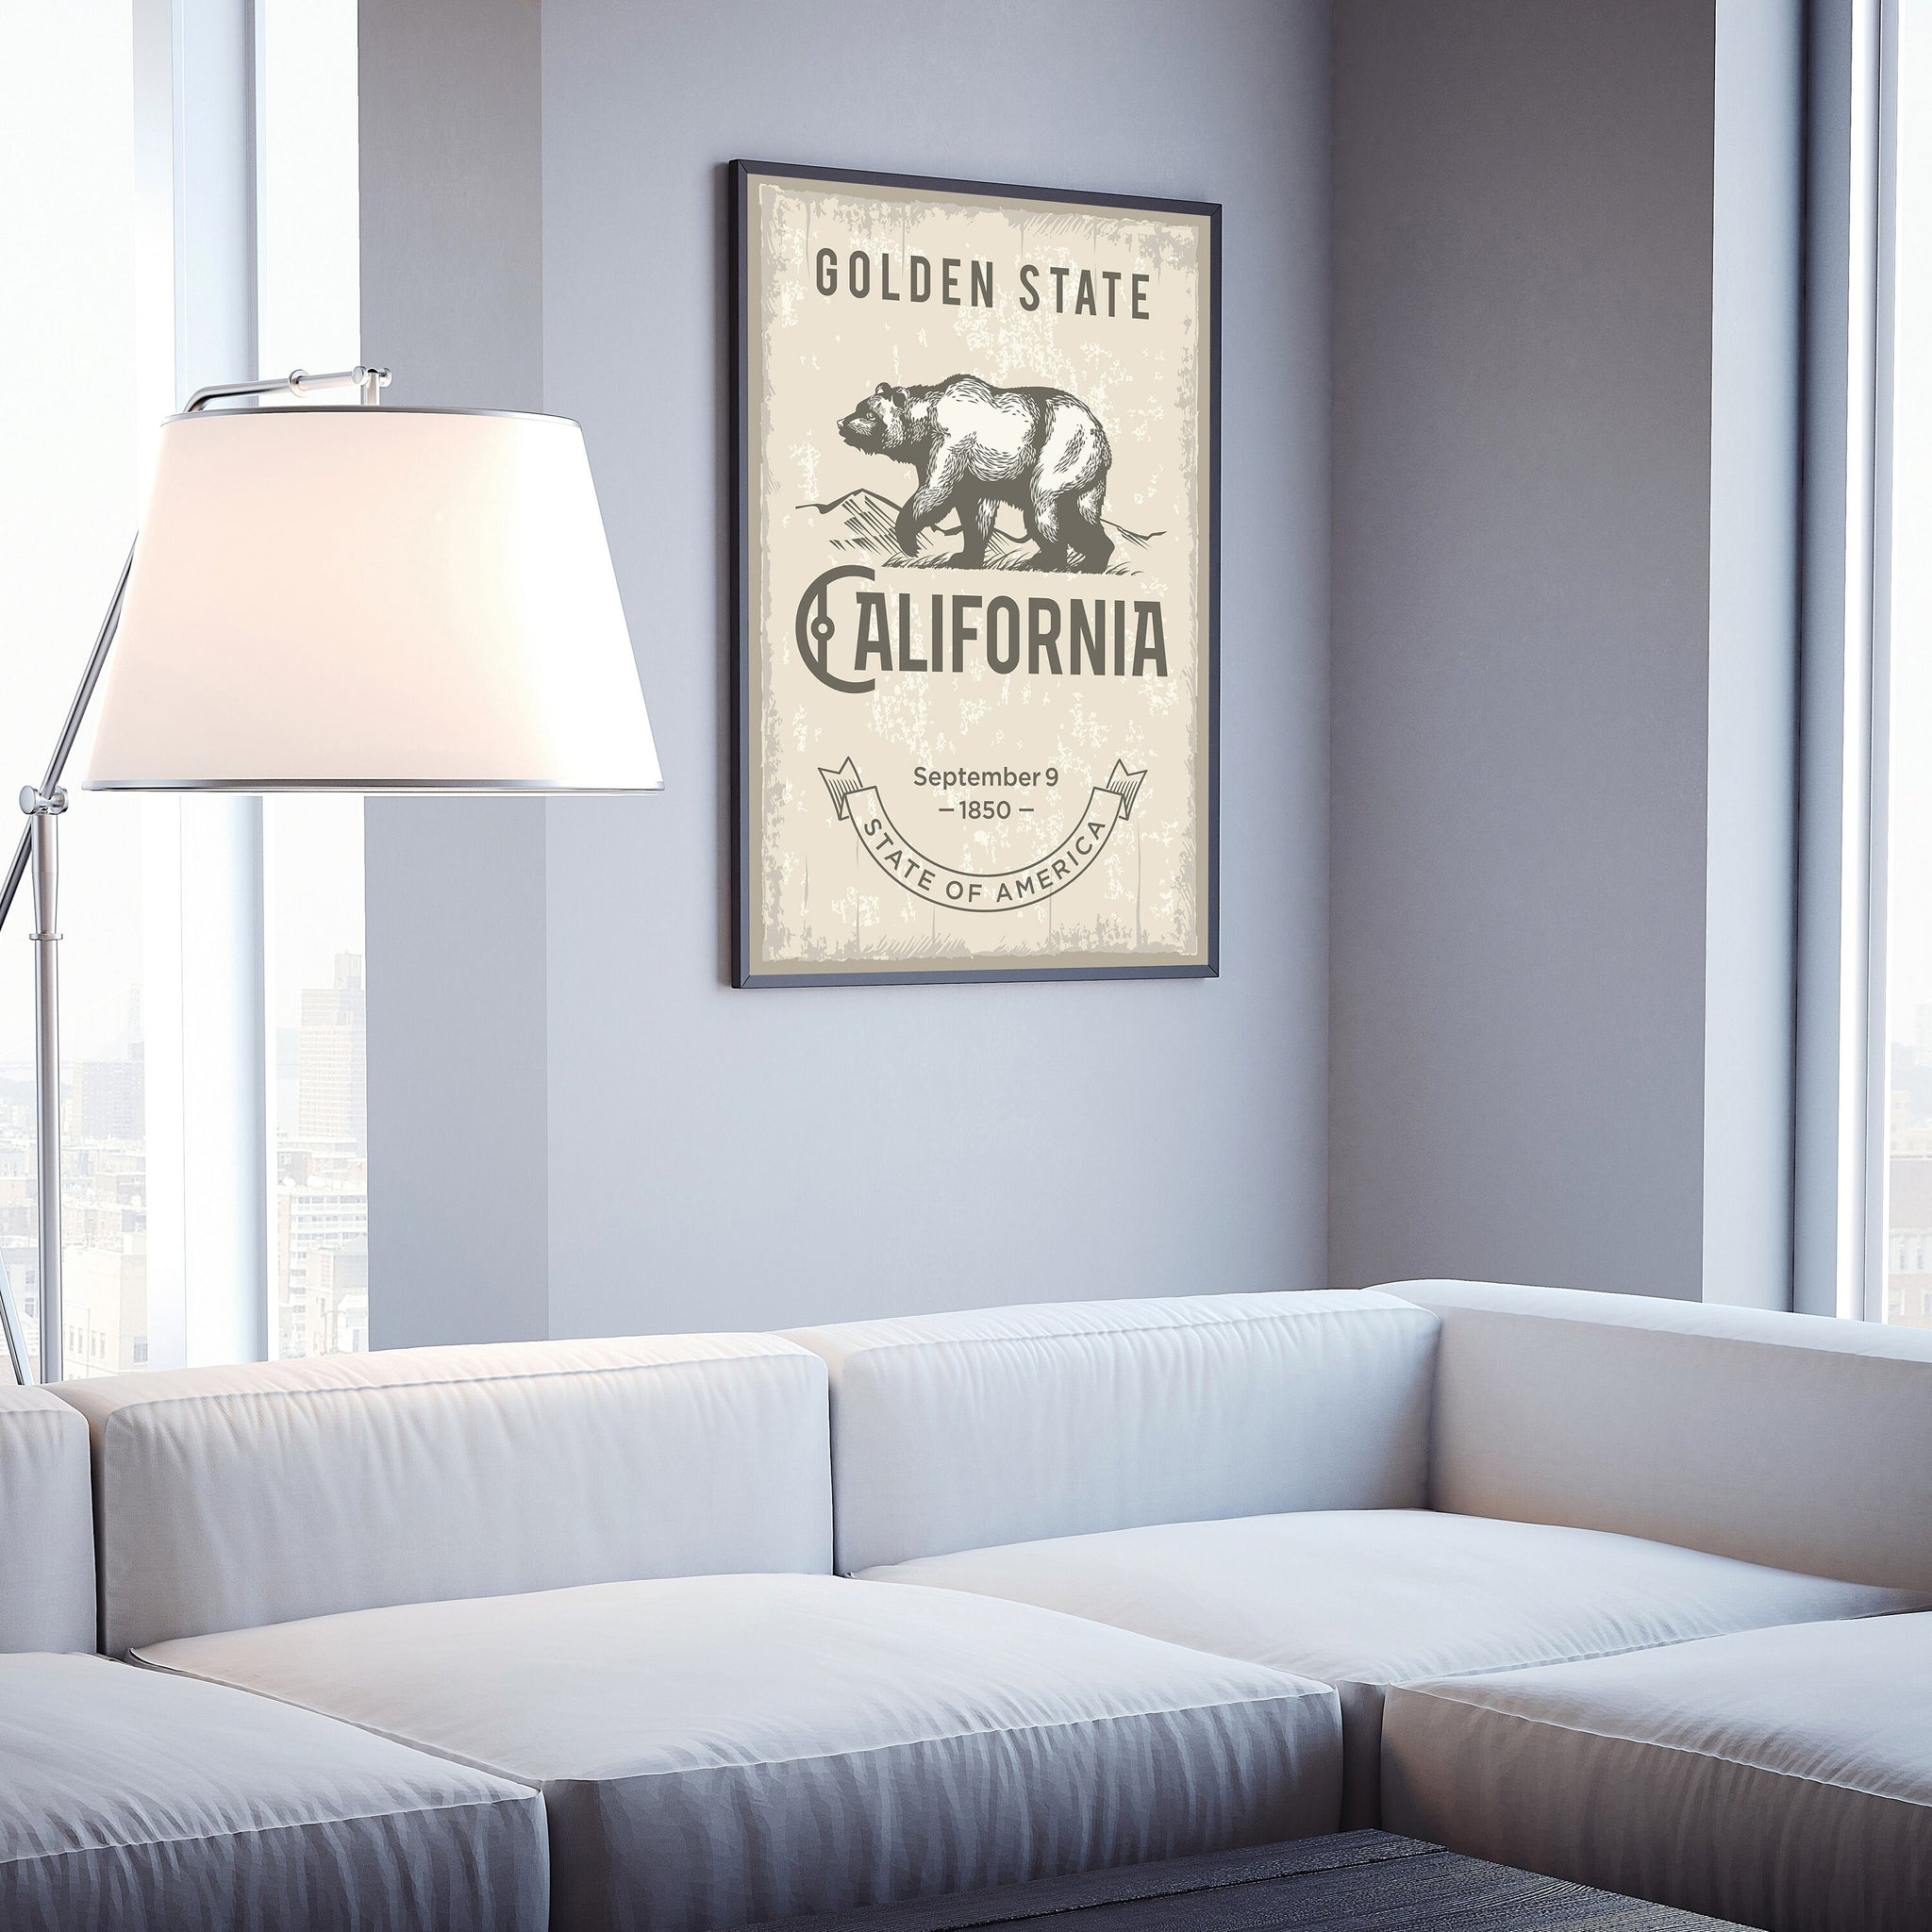 California State Symbol Poster, California State Poster Print, California State Emblem, Retro Travel State Poster, Home and Office Wall Art